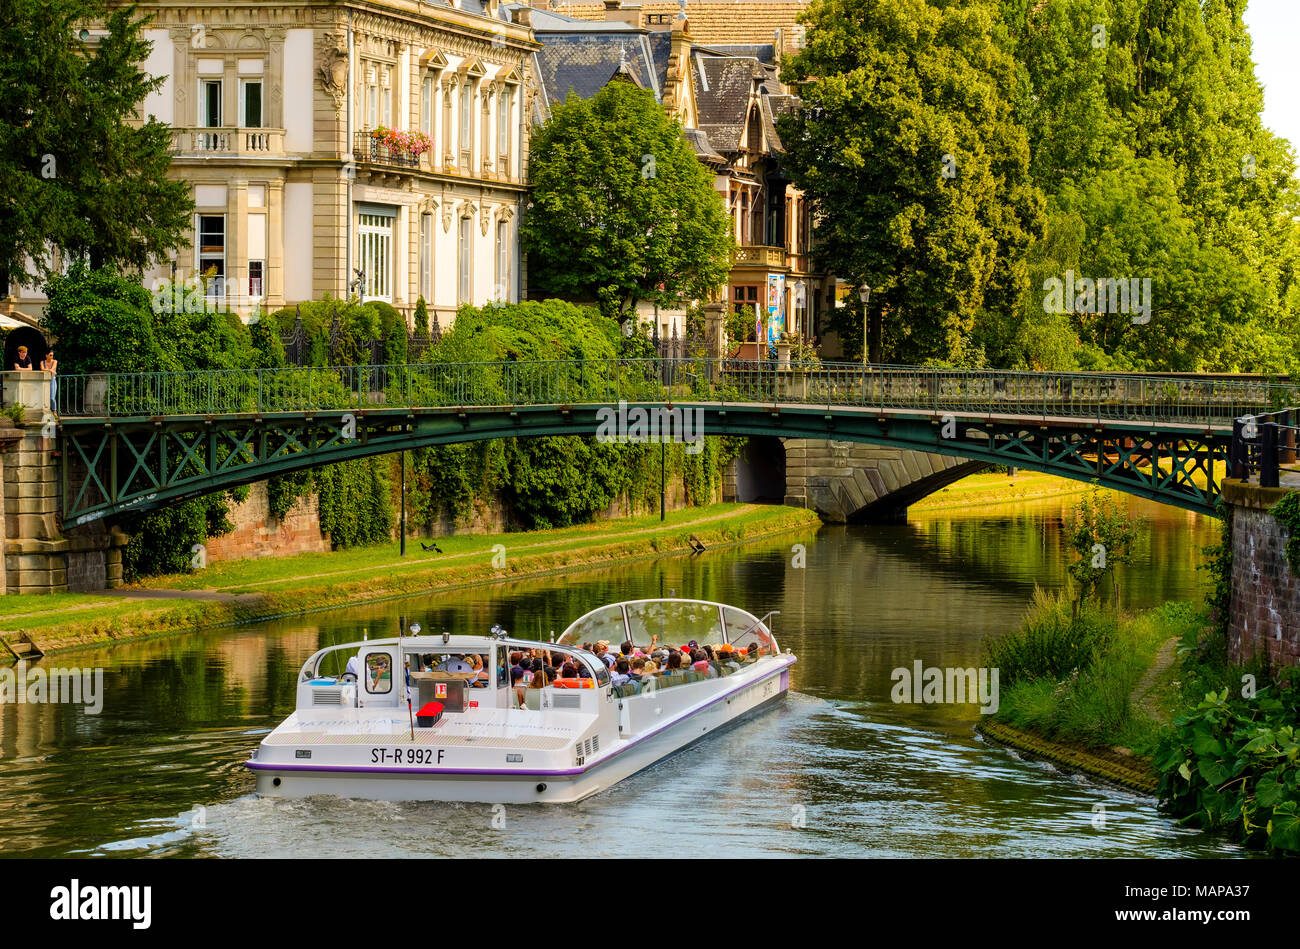 Sightseeing tour boat, tourists, Ill river, summer, Strasbourg, Alsace, France, Europe, Stock Photo